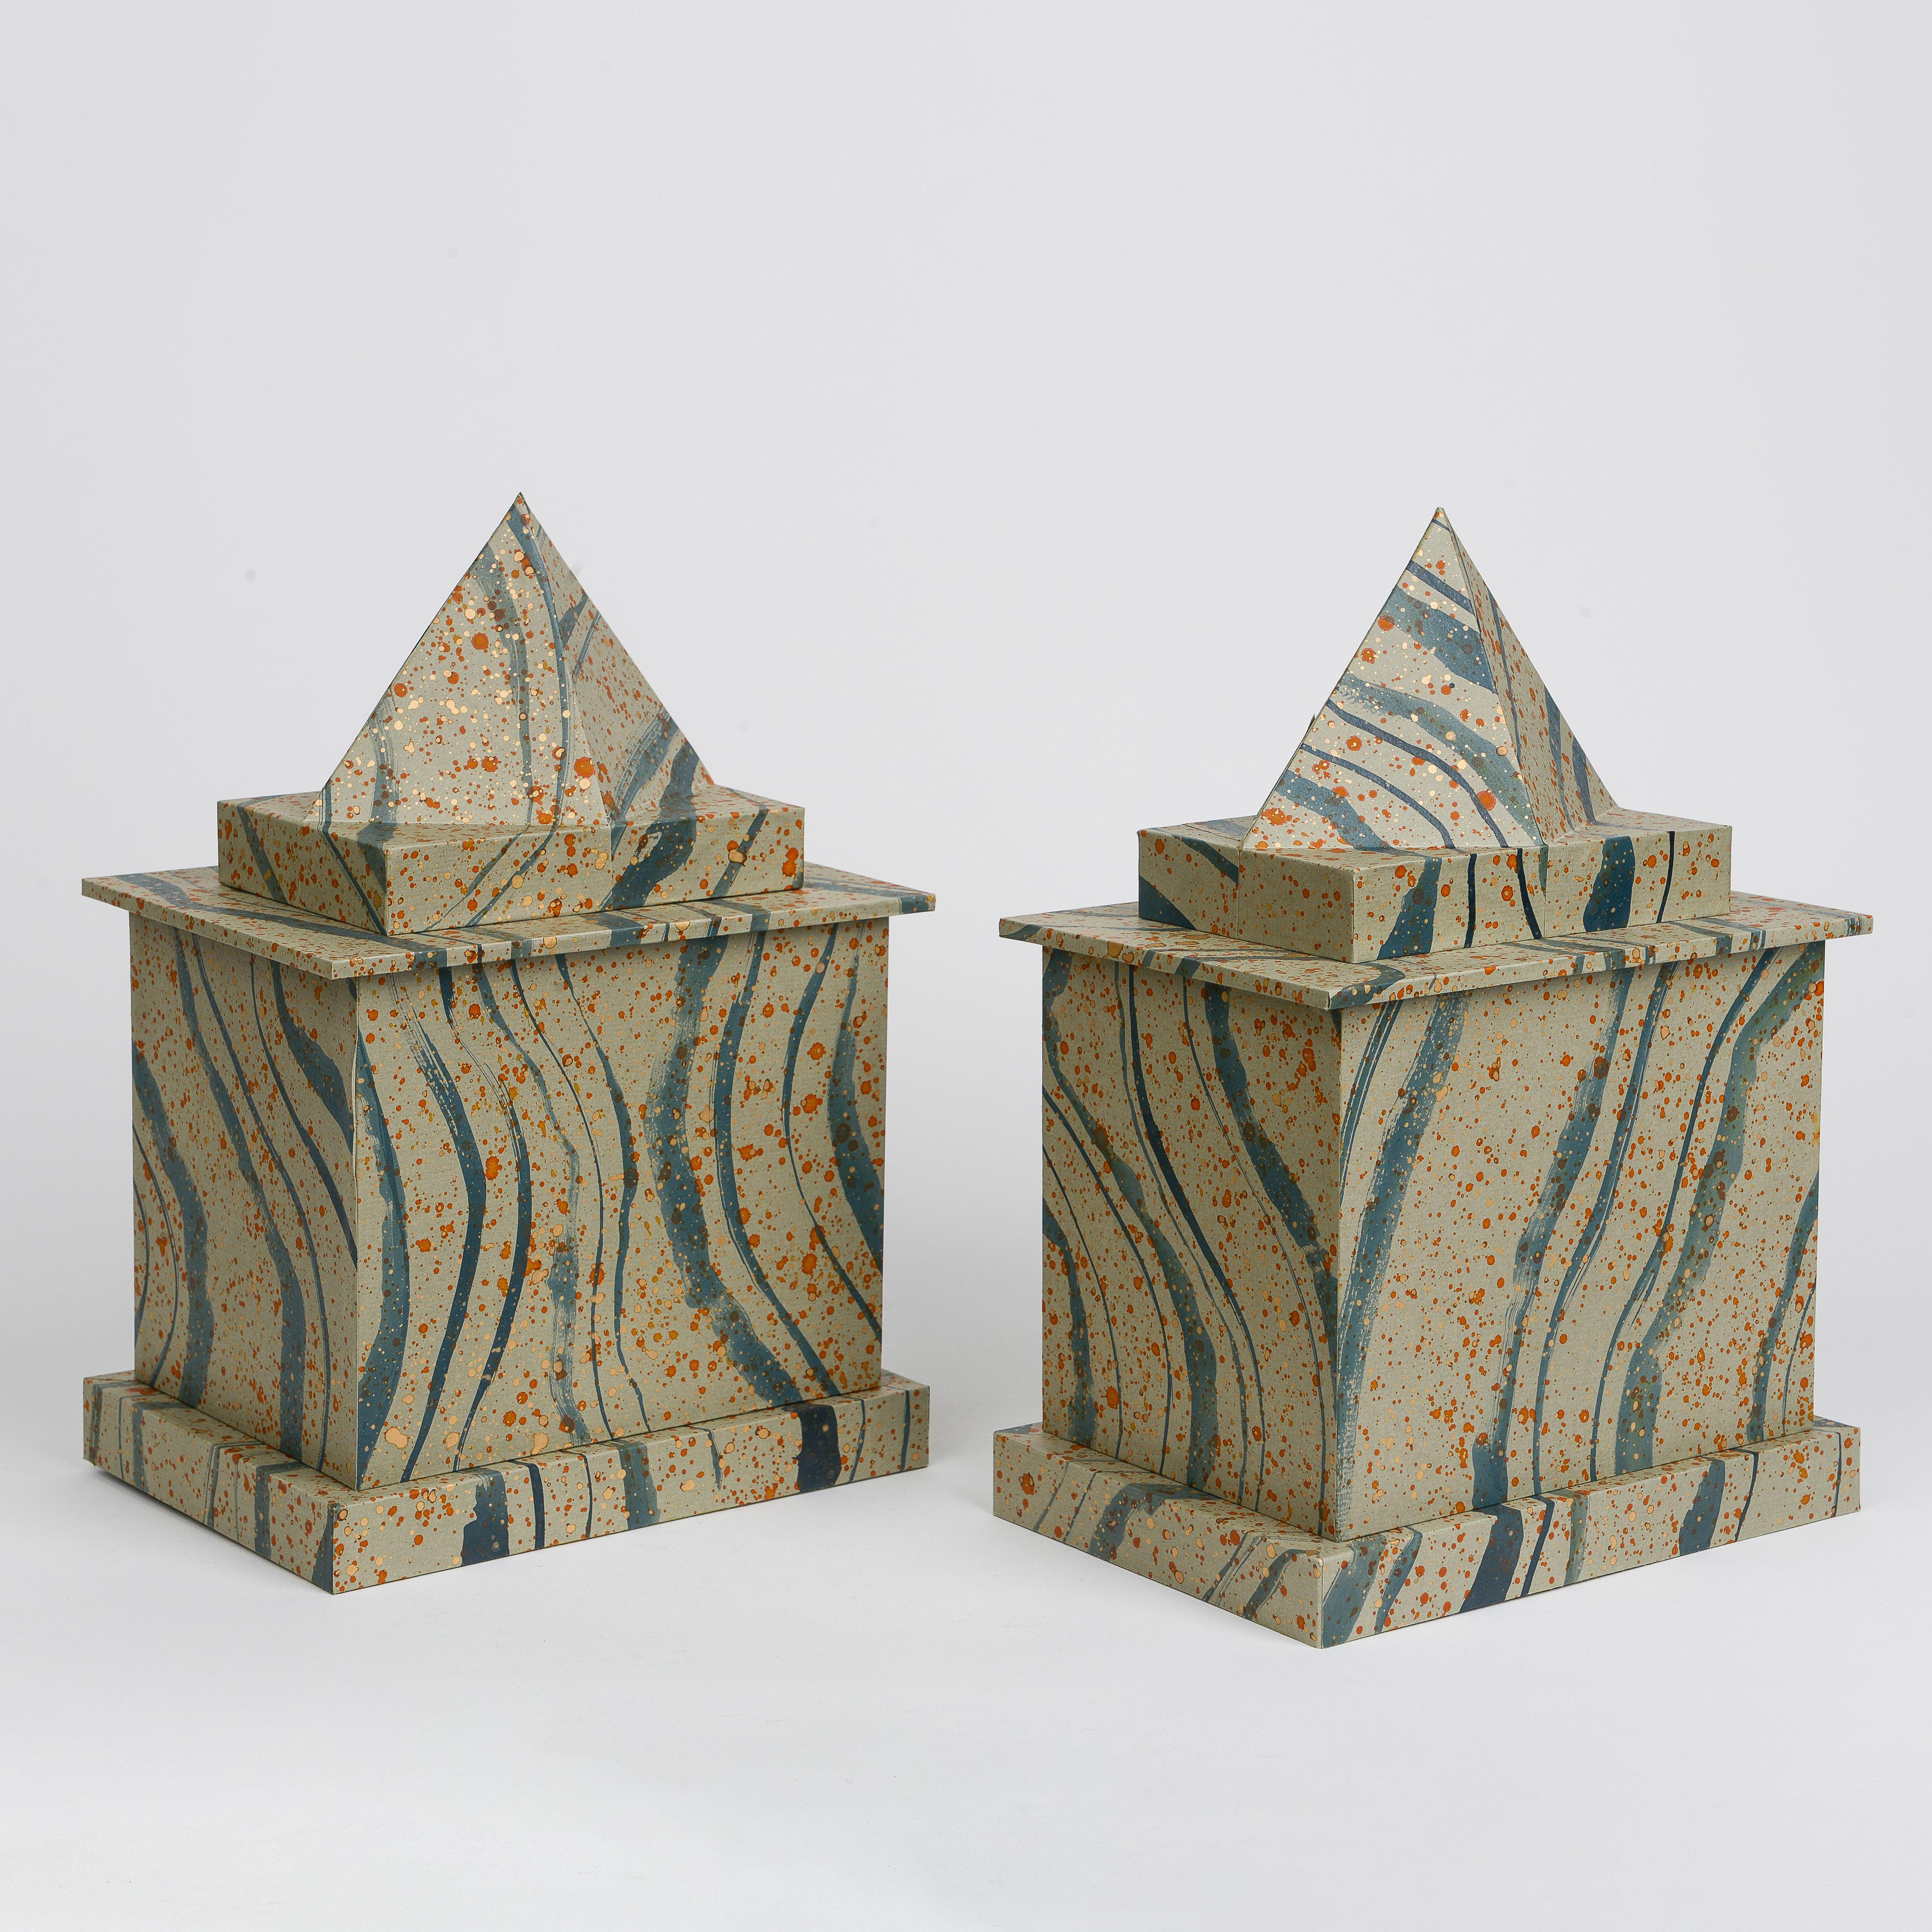 Each with removable pyramid lid; hand-painted with Prussian blue stripes and orange speckles on a taupe ground; hand-constructed.

From architectural follies of the eighteenth-century to crystalline rock formations, Thomas Engelhart translates the